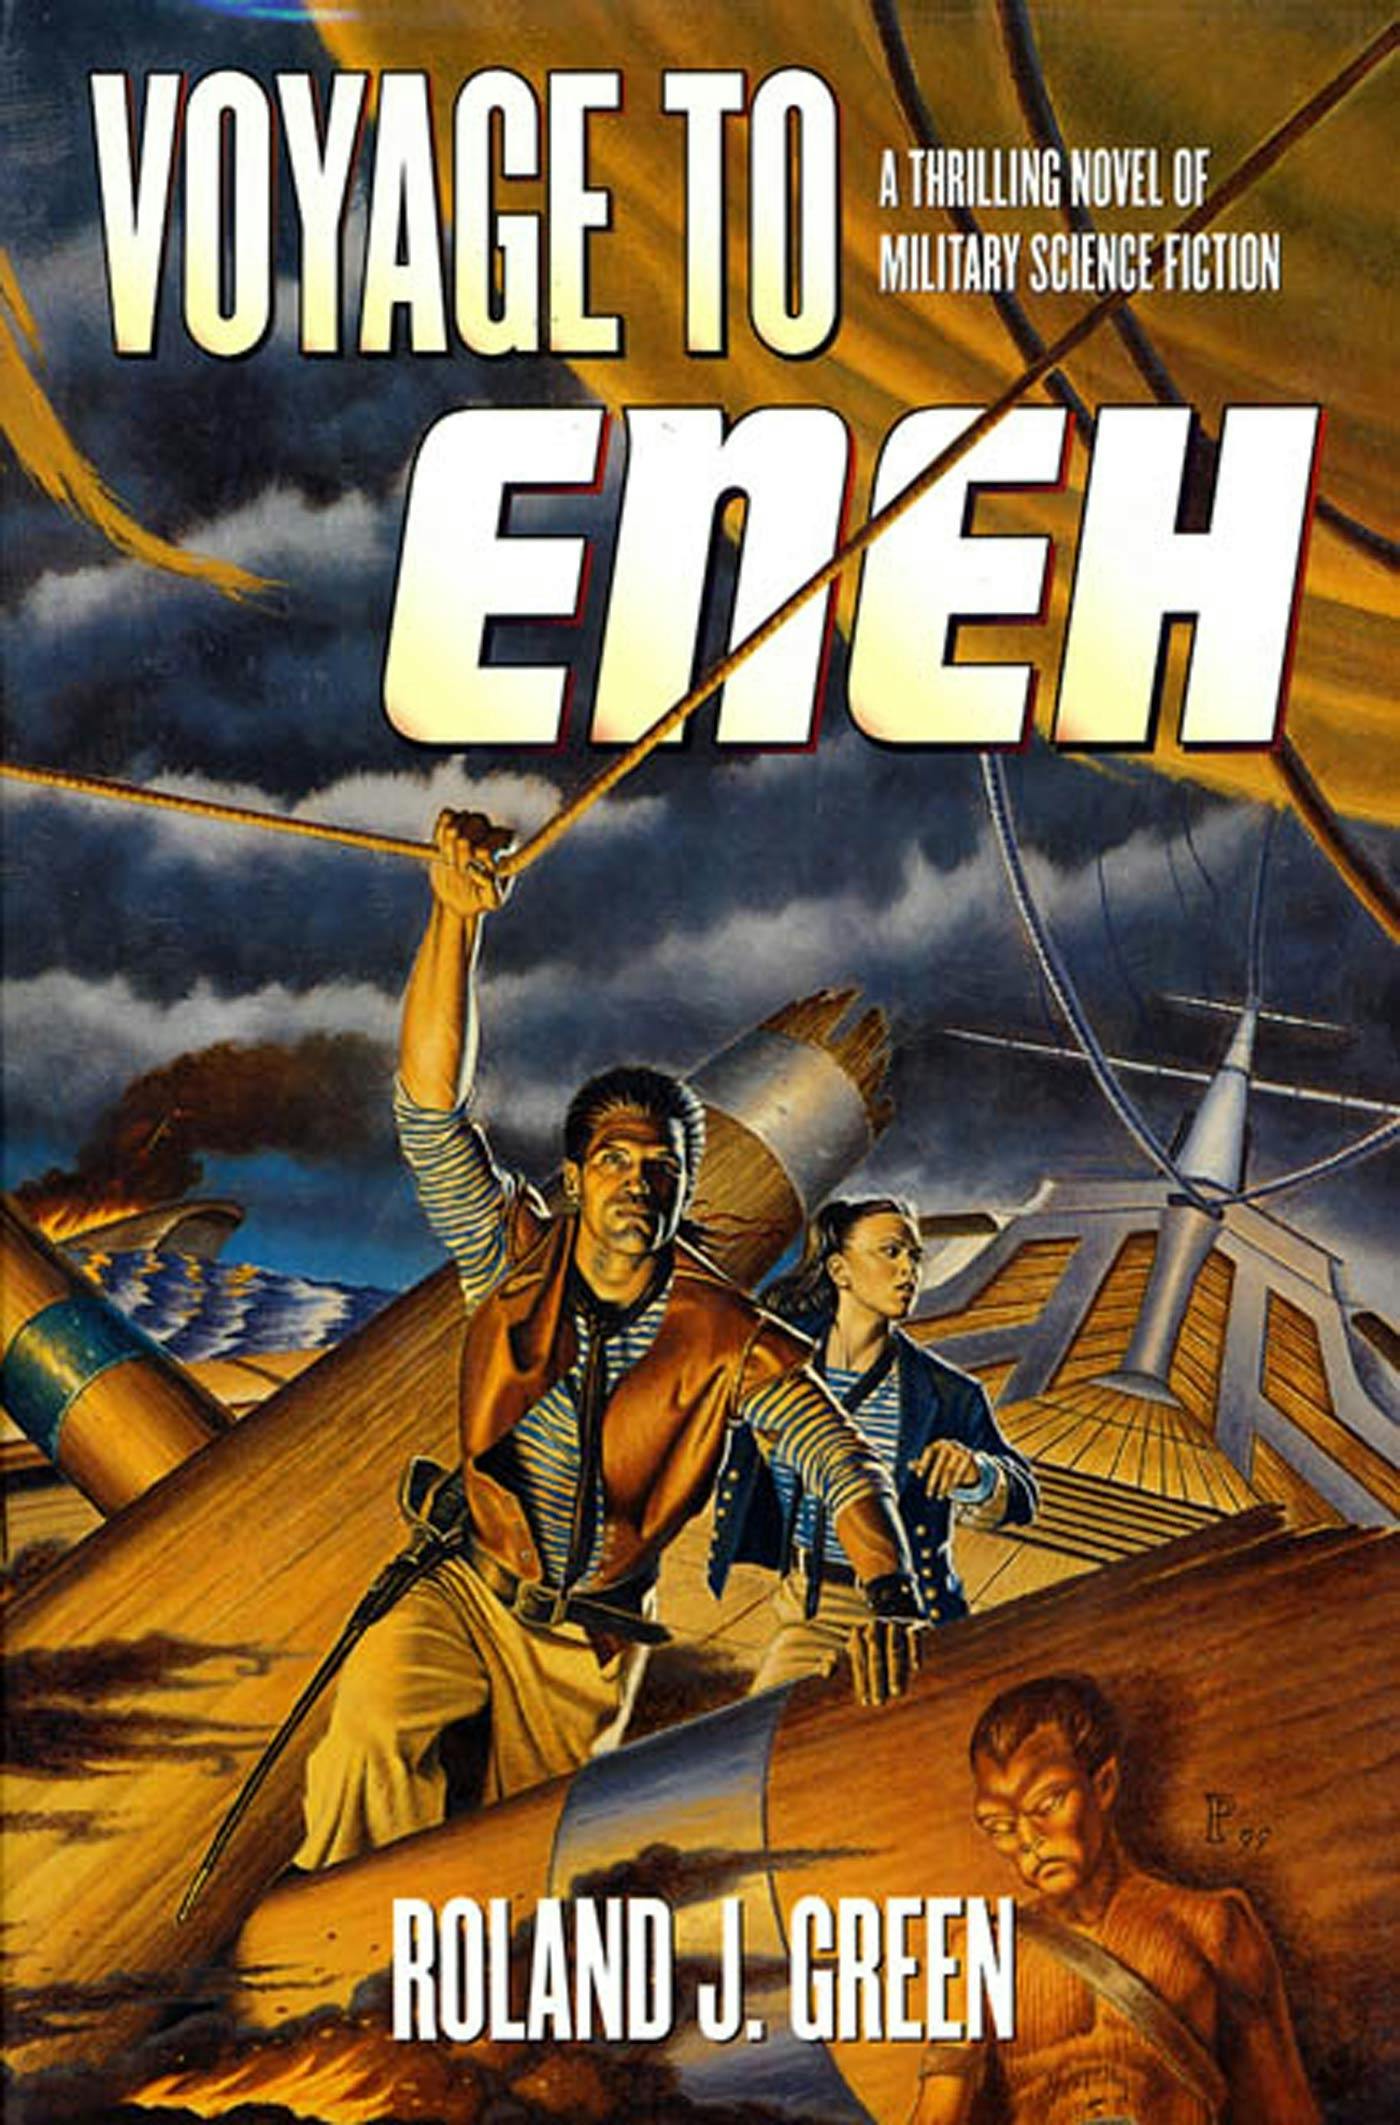 Cover for the book titled as: Voyage To Eneh